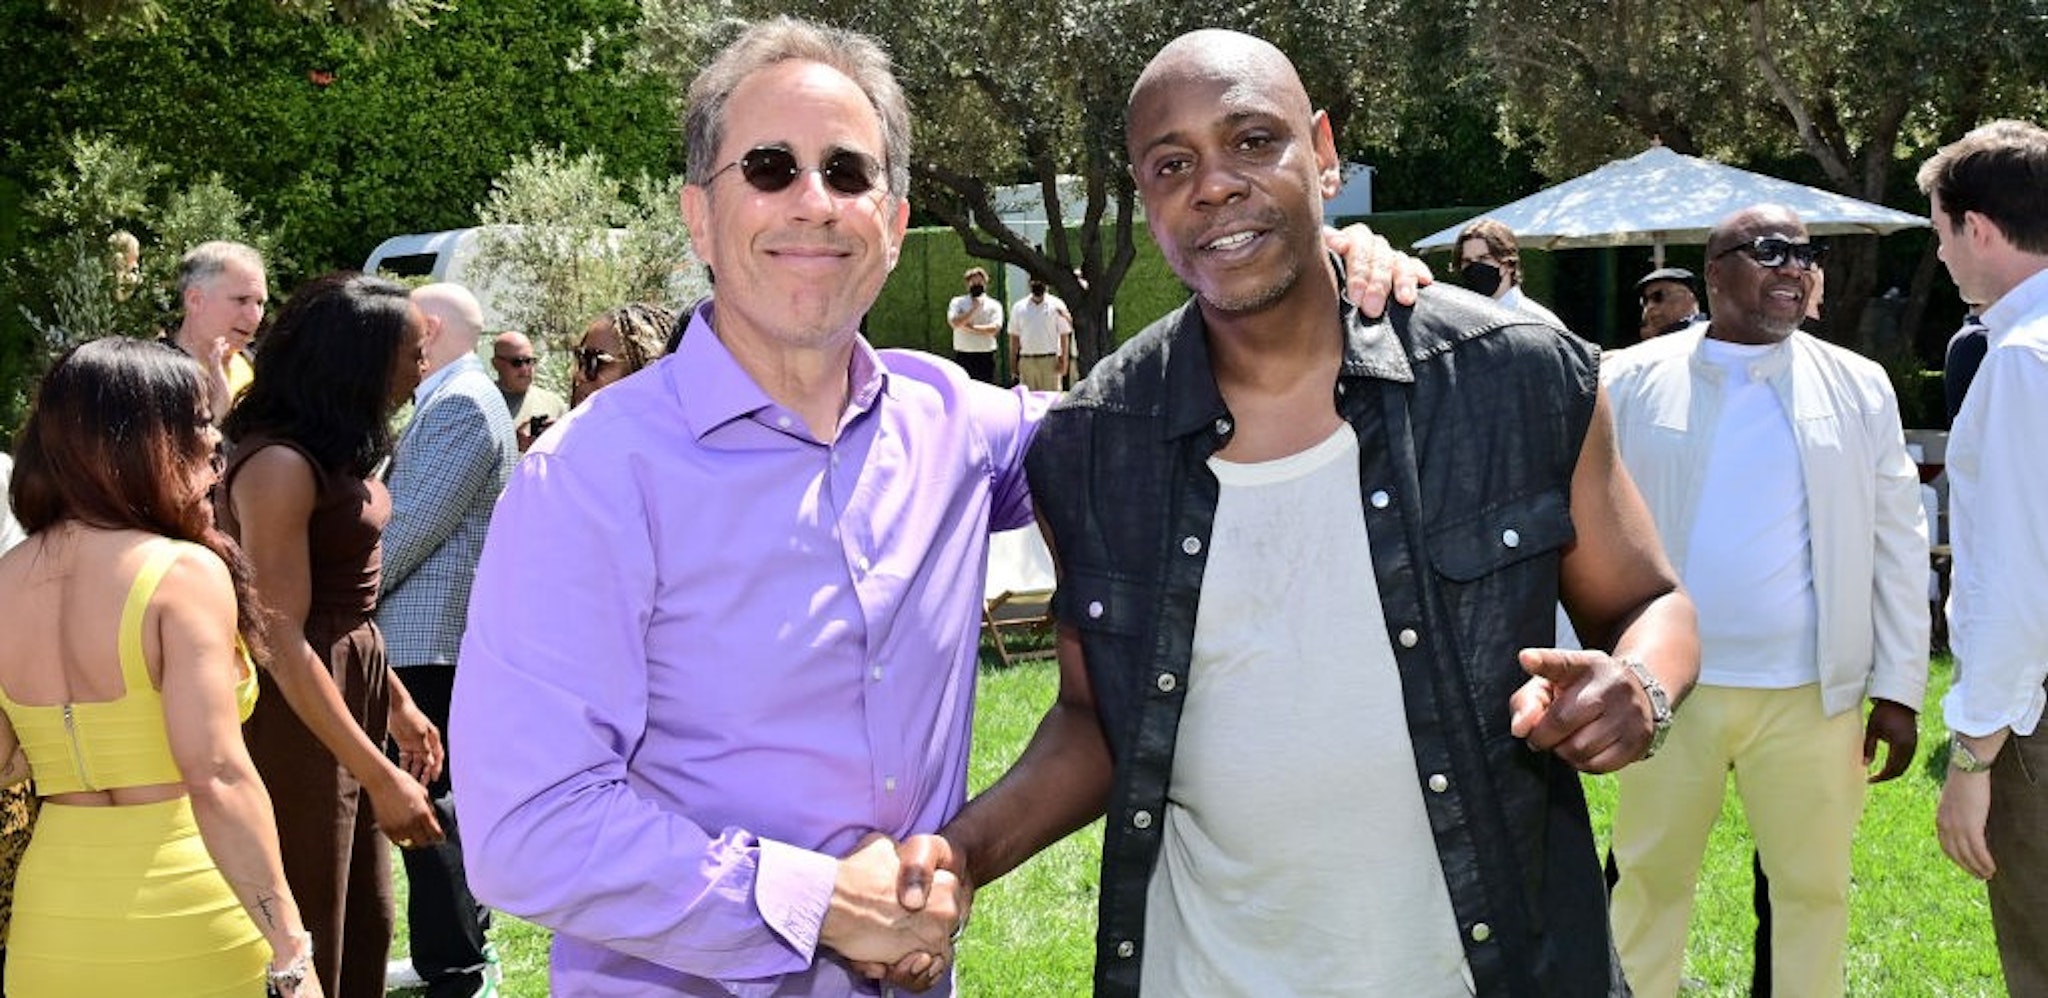 LOS ANGELES, CALIFORNIA - MAY 01: (L-R) Jerry Seinfeld and Dave Chappelle attend NETFLIX IS A JOKE PRESENTS - Ted's Brunch on May 01, 2022 in Los Angeles, California. (Photo by